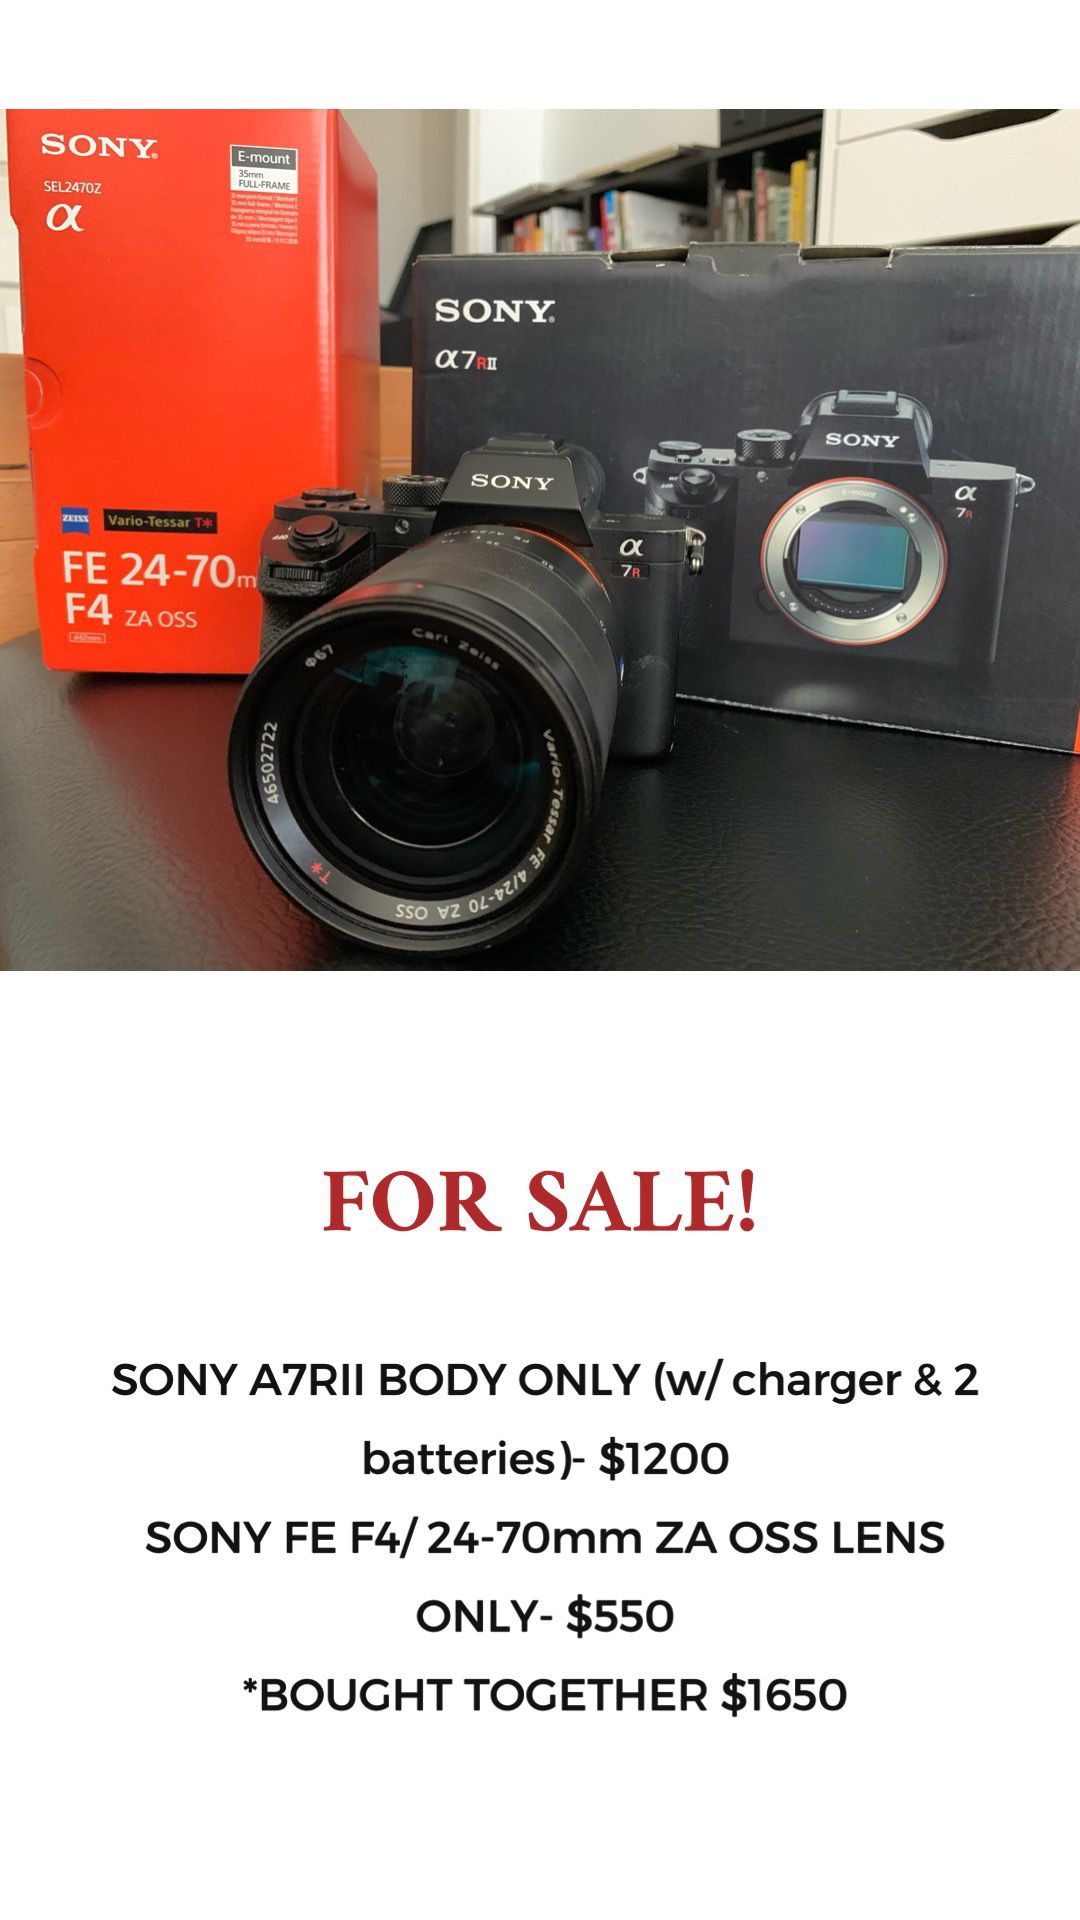 SONY A7RII CAMERA with SONY FE F4/ 24-70mm OSS Lens (CAN BUY SEPARATELY)